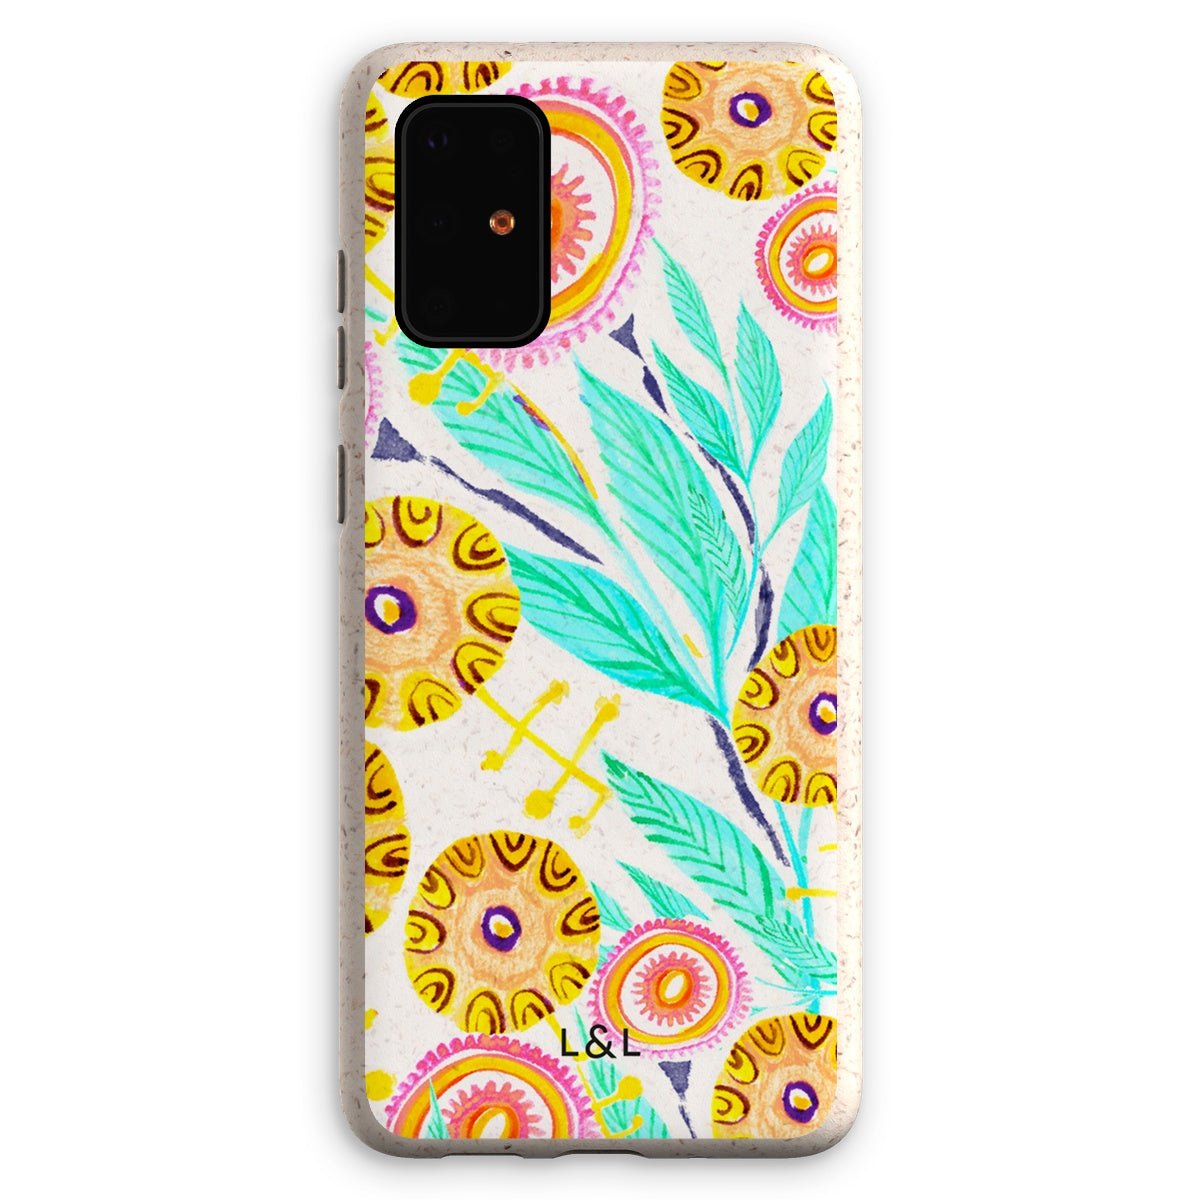 Floral Pattern Eco Phone Case - Loam & Lore